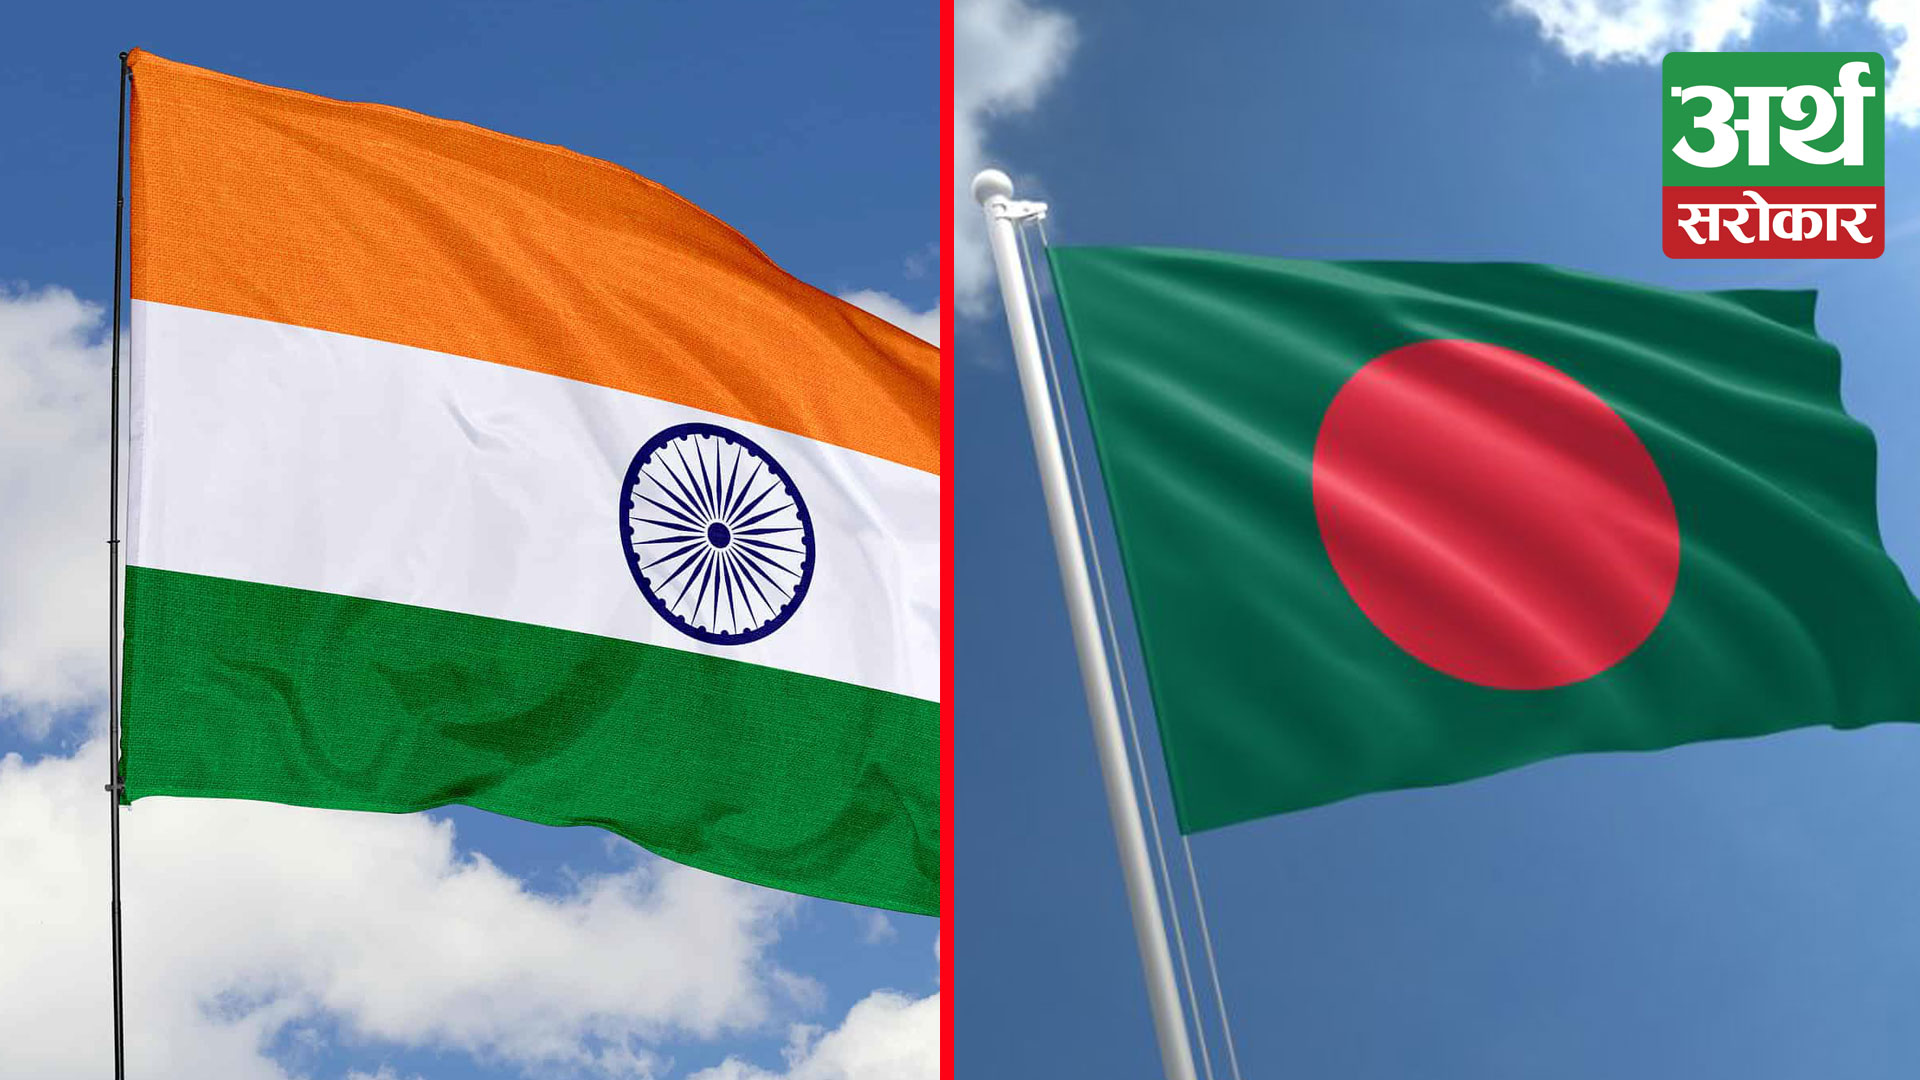 Significance of 5th India-Bangladesh Defence Dialogue and Growing Indo-Bangla Security Ties